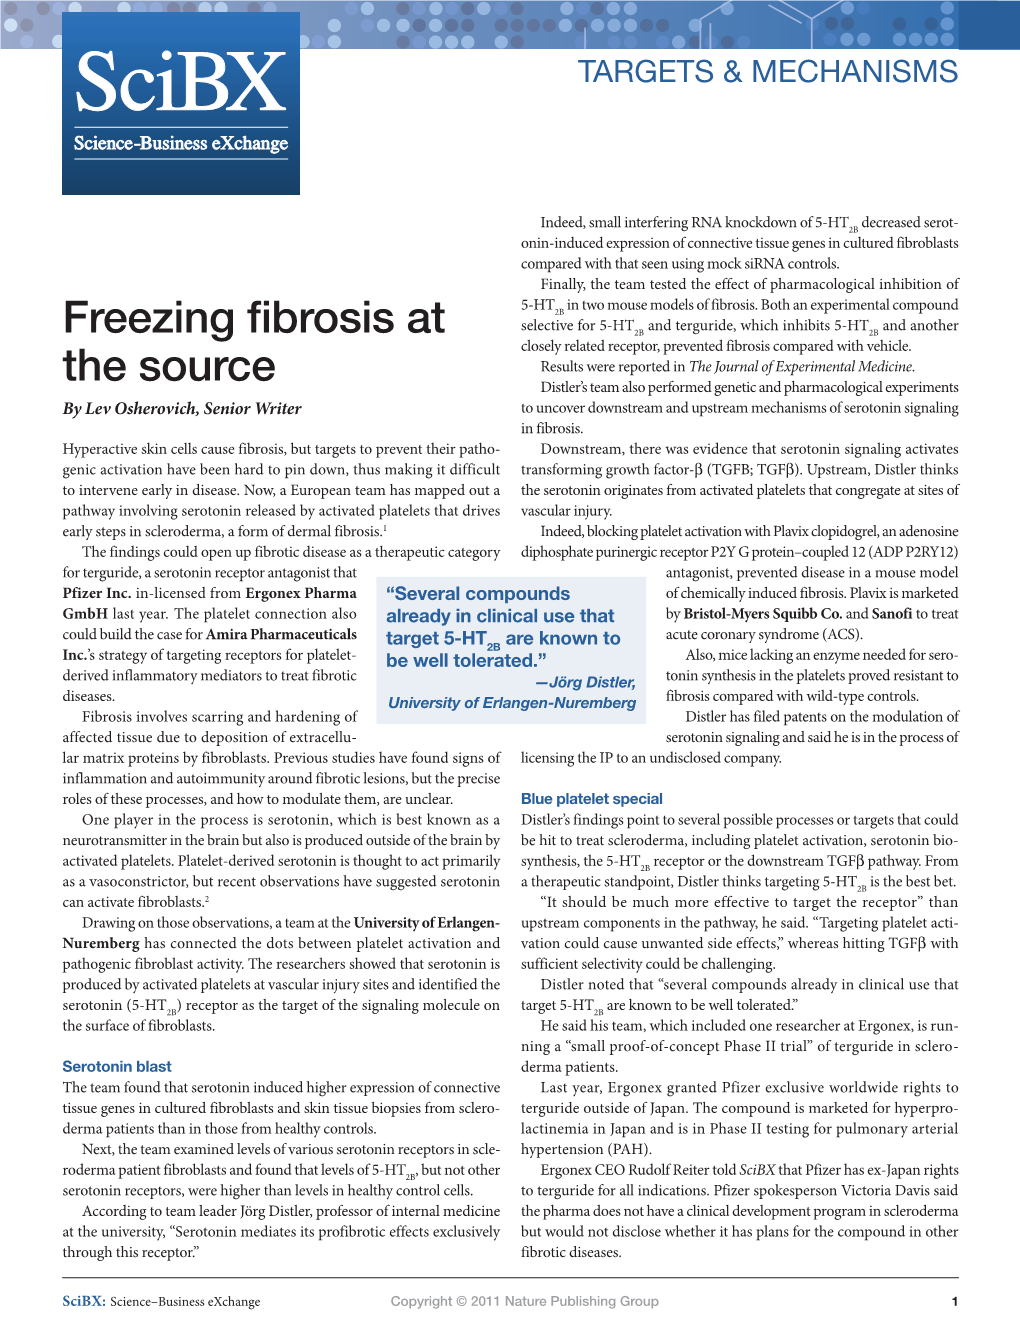 Freezing Fibrosis at the Source